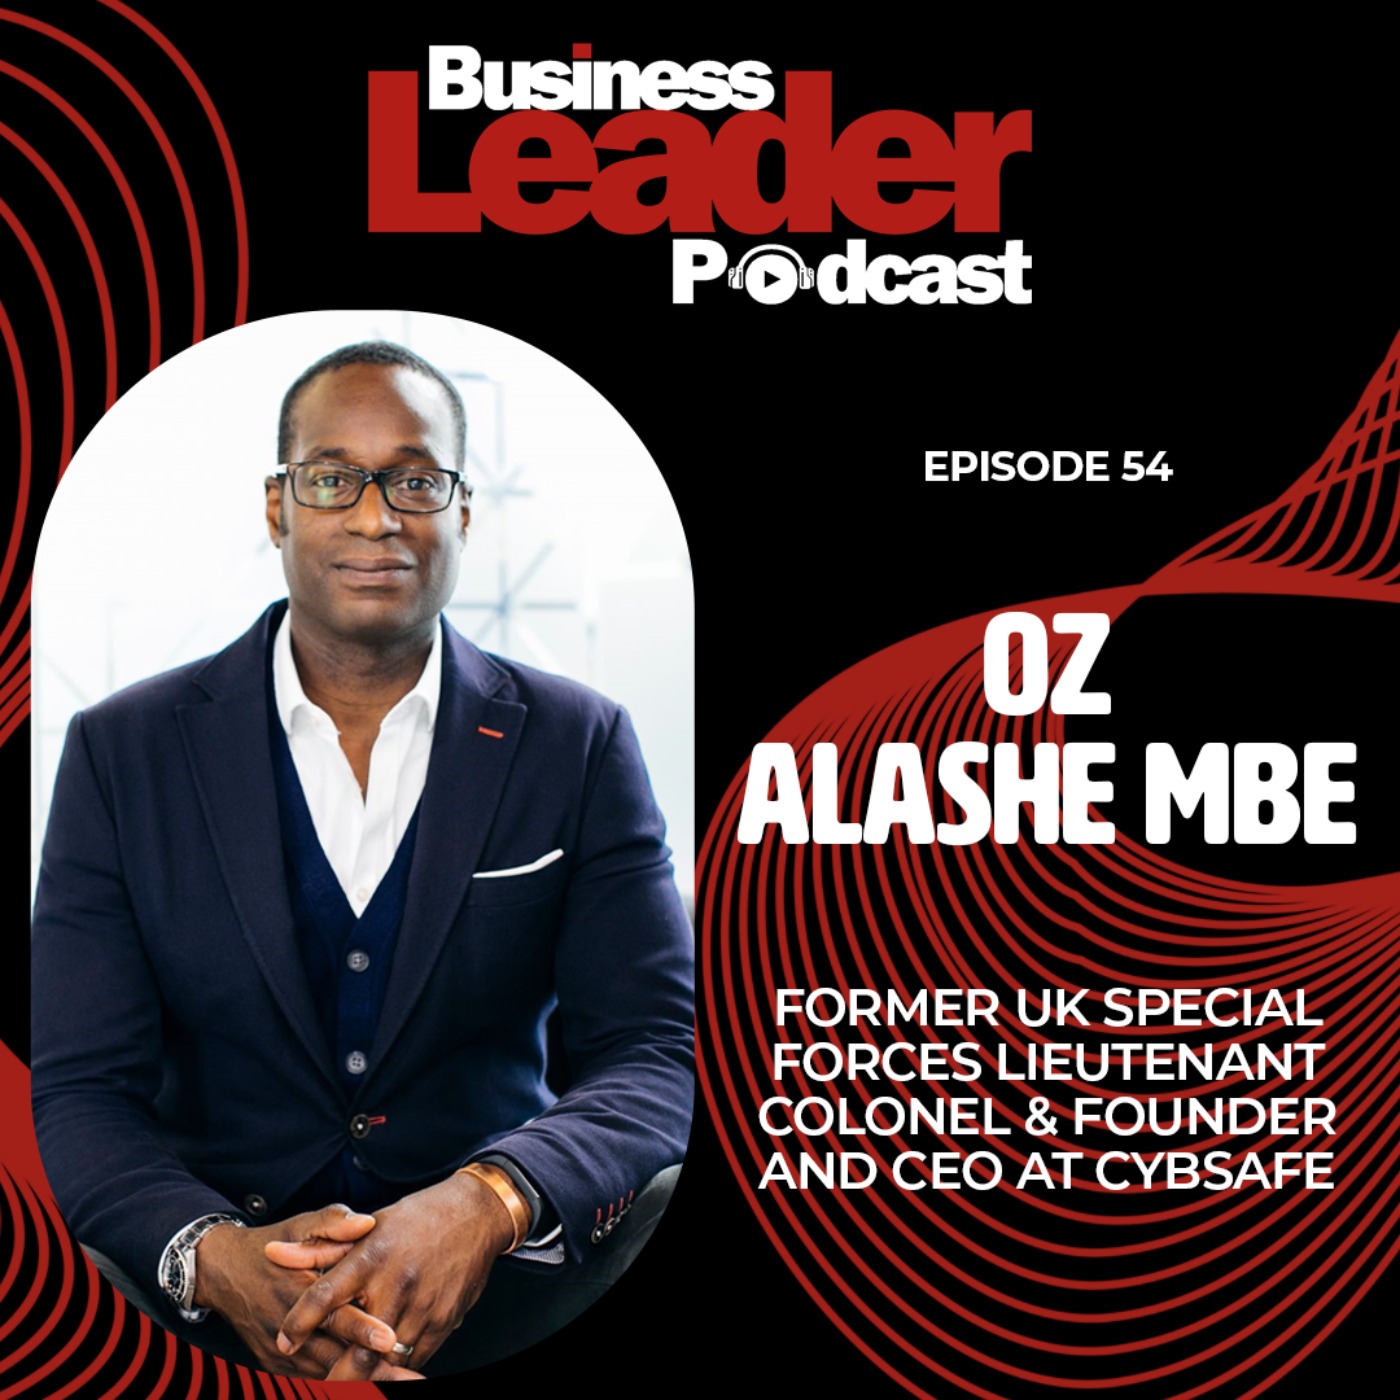 Oz Alashe MBE: Geopolitics, cyber attacks and the human errors behind them